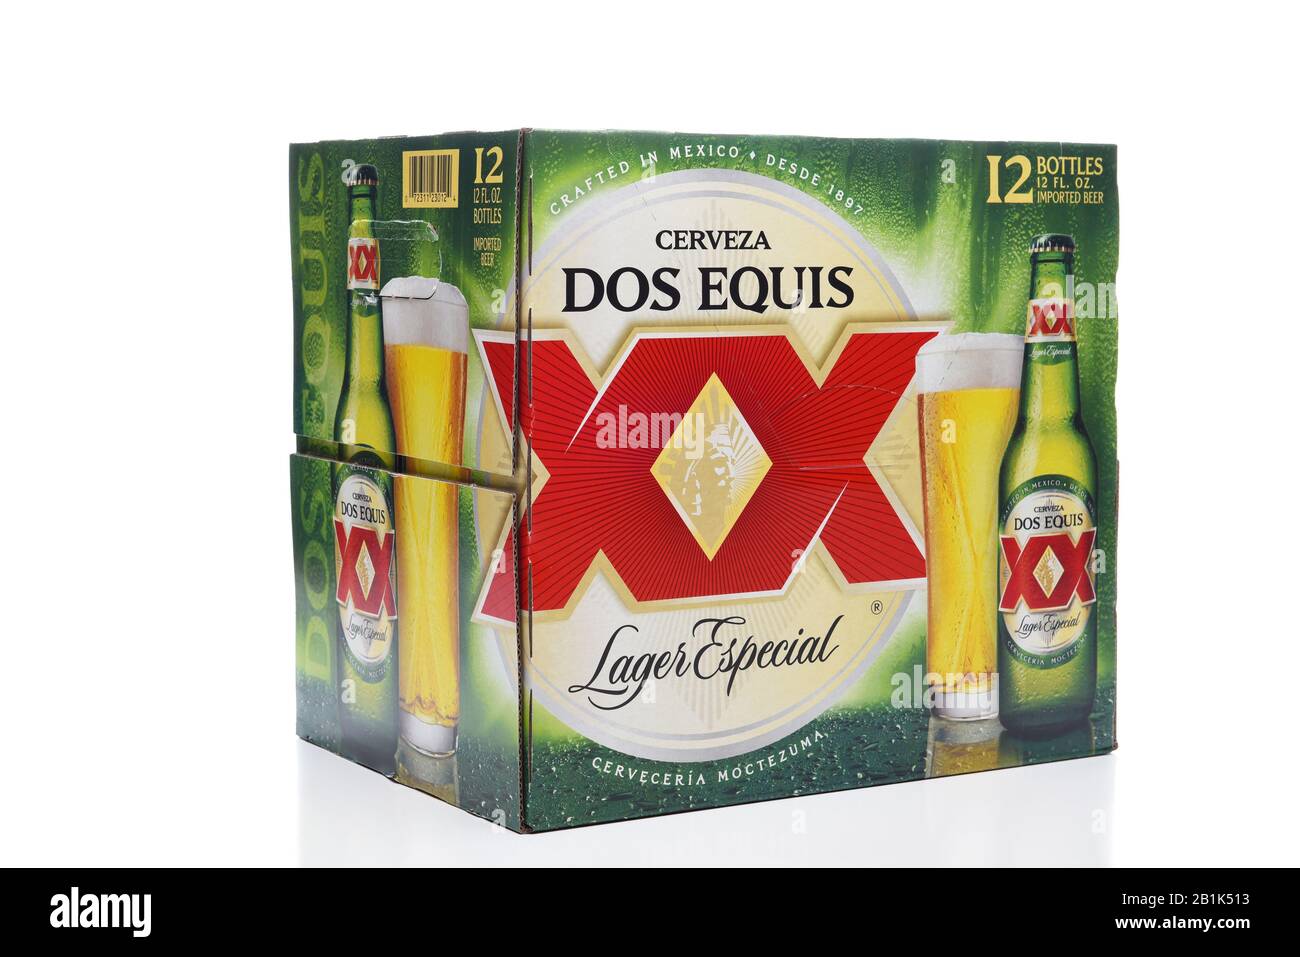 IRVINE, CALIFORNIA - JULY 5, 2019:  A 12 pack of Dos Equis Lager Especial. Founded in 1890 the Cuauhtemoc-Moctezuma Brewery in Monterrey, Mexico is a Stock Photo